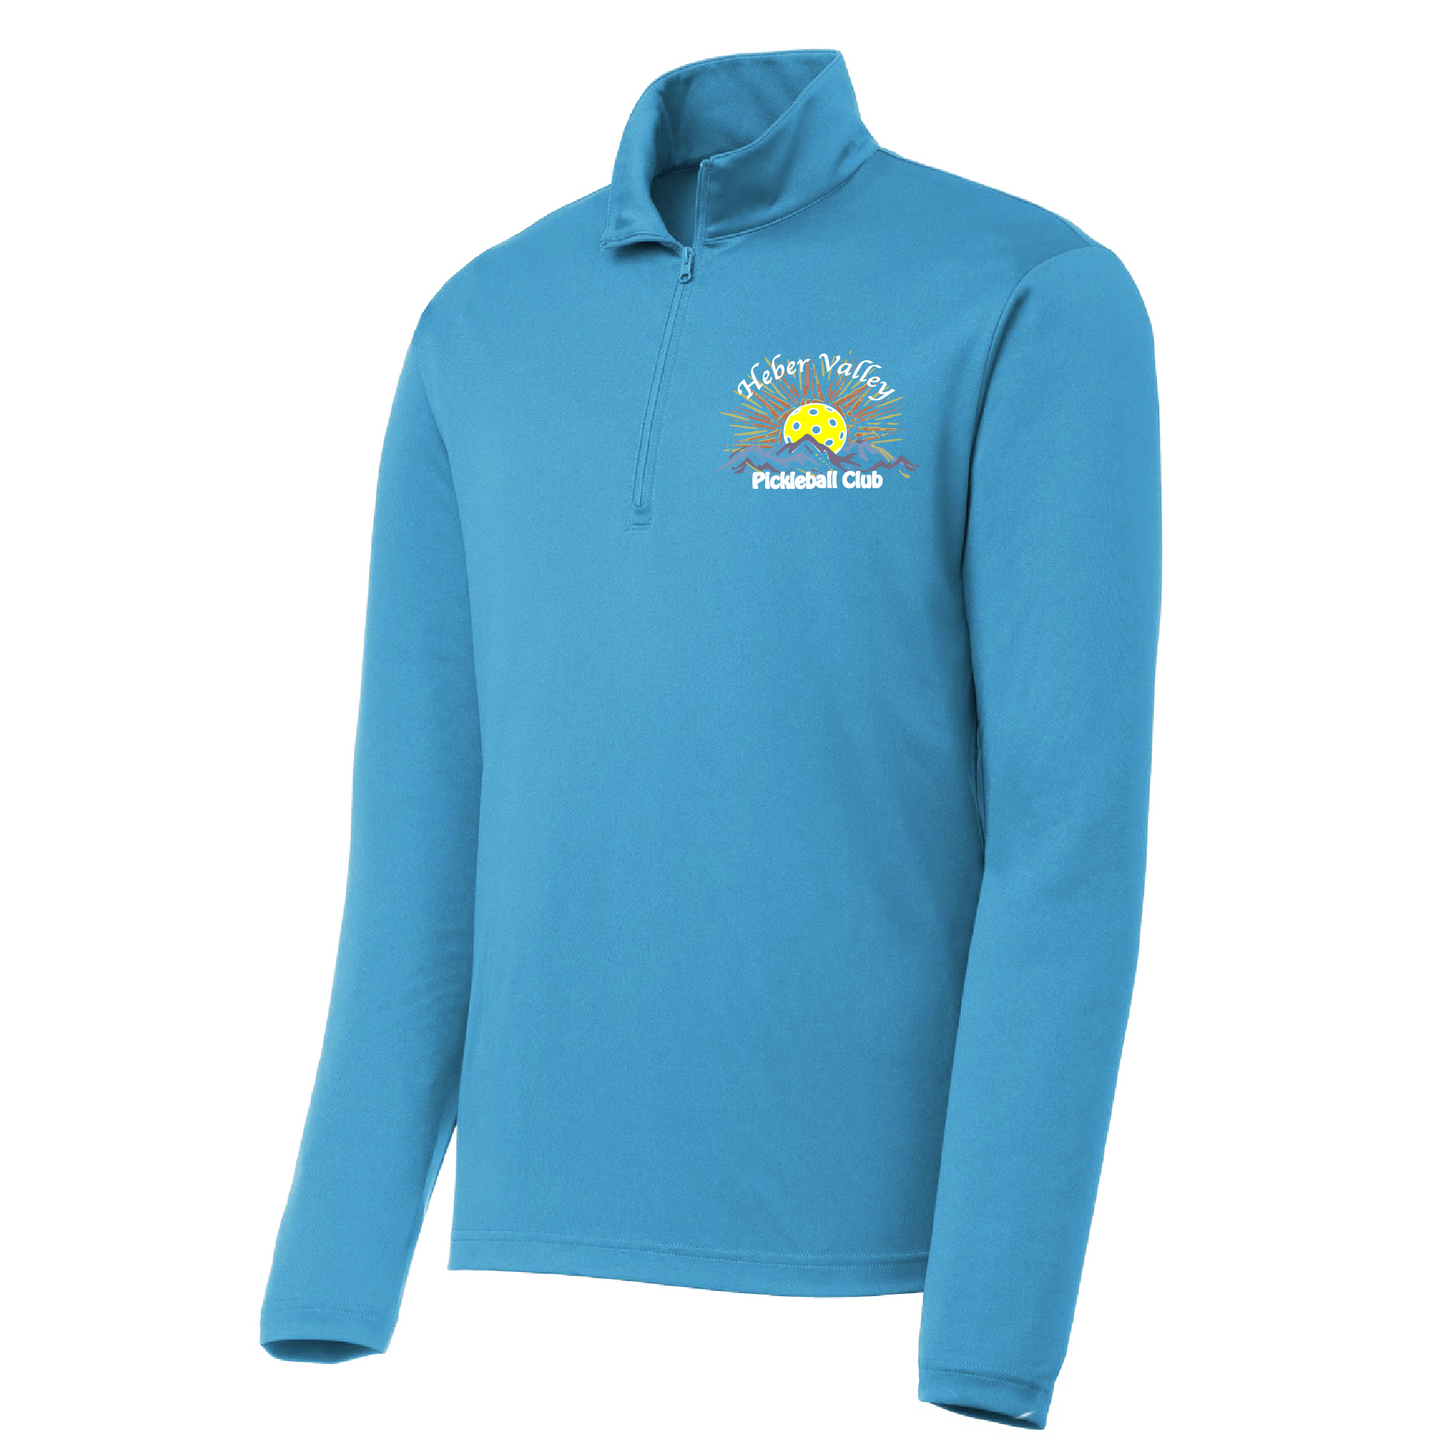 Pickleball Shirt Design: Heber Valley Pickleball Club  Men's 1/4-Zip Pullover: 100% Polyester with PosiCharge technology  Customize Design Location:  Choose Large Design on Back or Small Front Pocket Area.  Turn up the volume in this Men's shirt with its perfect mix of softness and attitude. Material is ultra-comfortable with moisture wicking properties and tri-blend softness. PosiCharge technology locks in color. Highly breathable and lightweight. Versatile enough for wearing year-round.